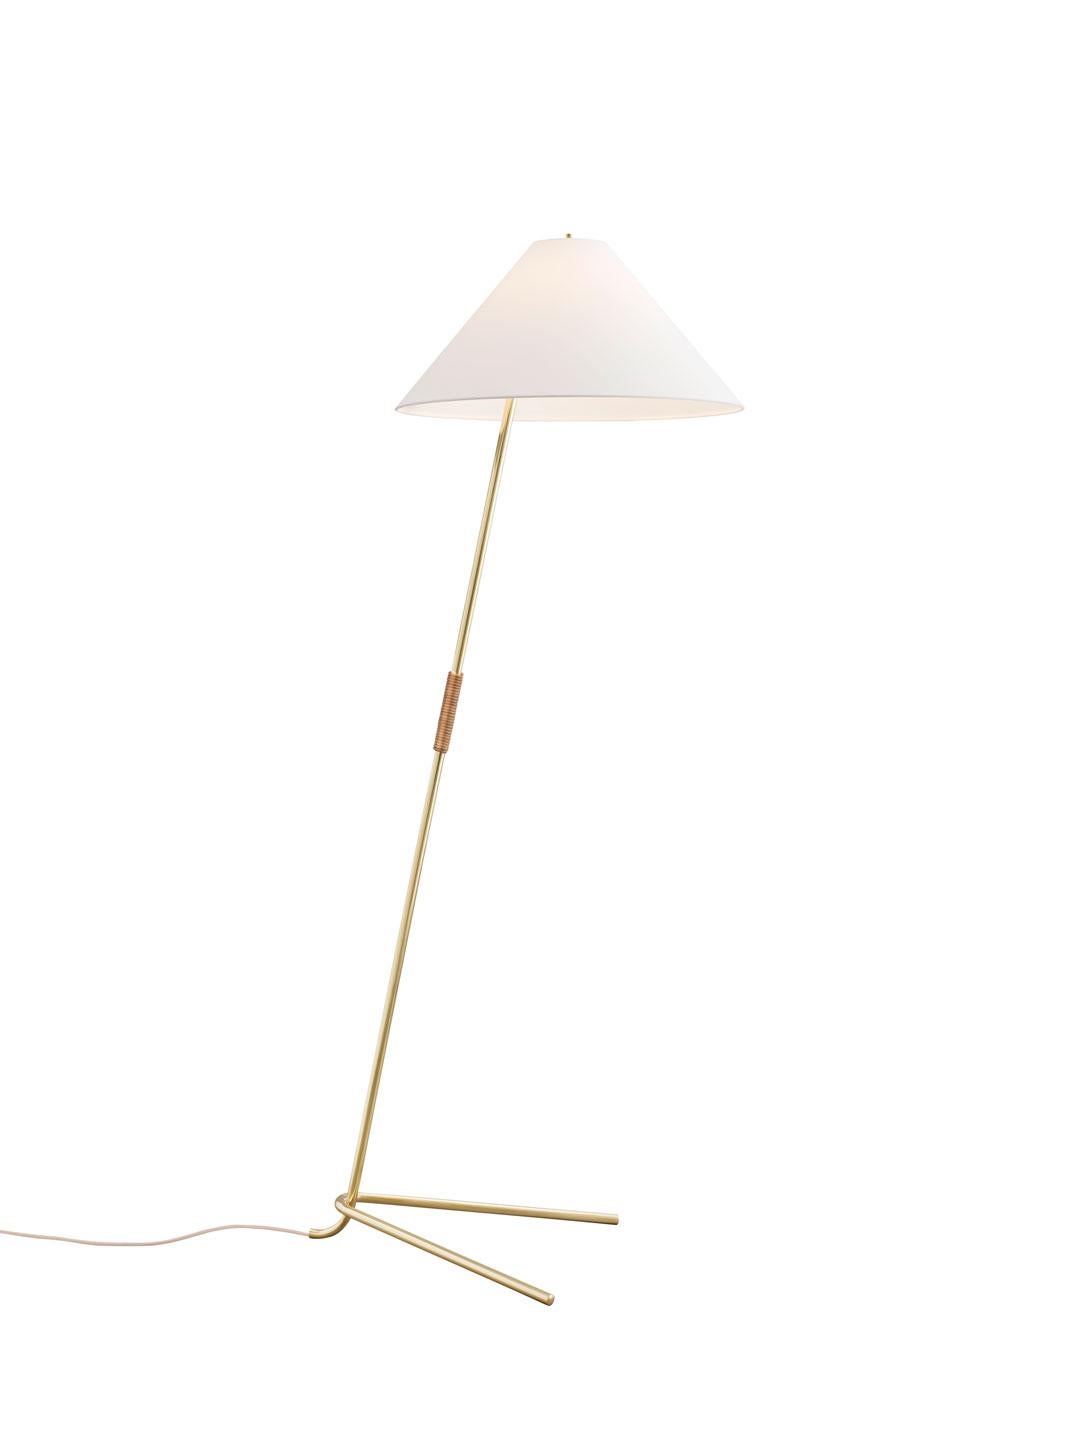 Floor lamp 'Hase BL' originally designed in 1952 by J.T. Kalmar, Austria, executed in polished brass and partly wrapped in a tactile leather to serve as a grip for easy repositioning. 
'Have BL' provides directional and ambient light thru it's